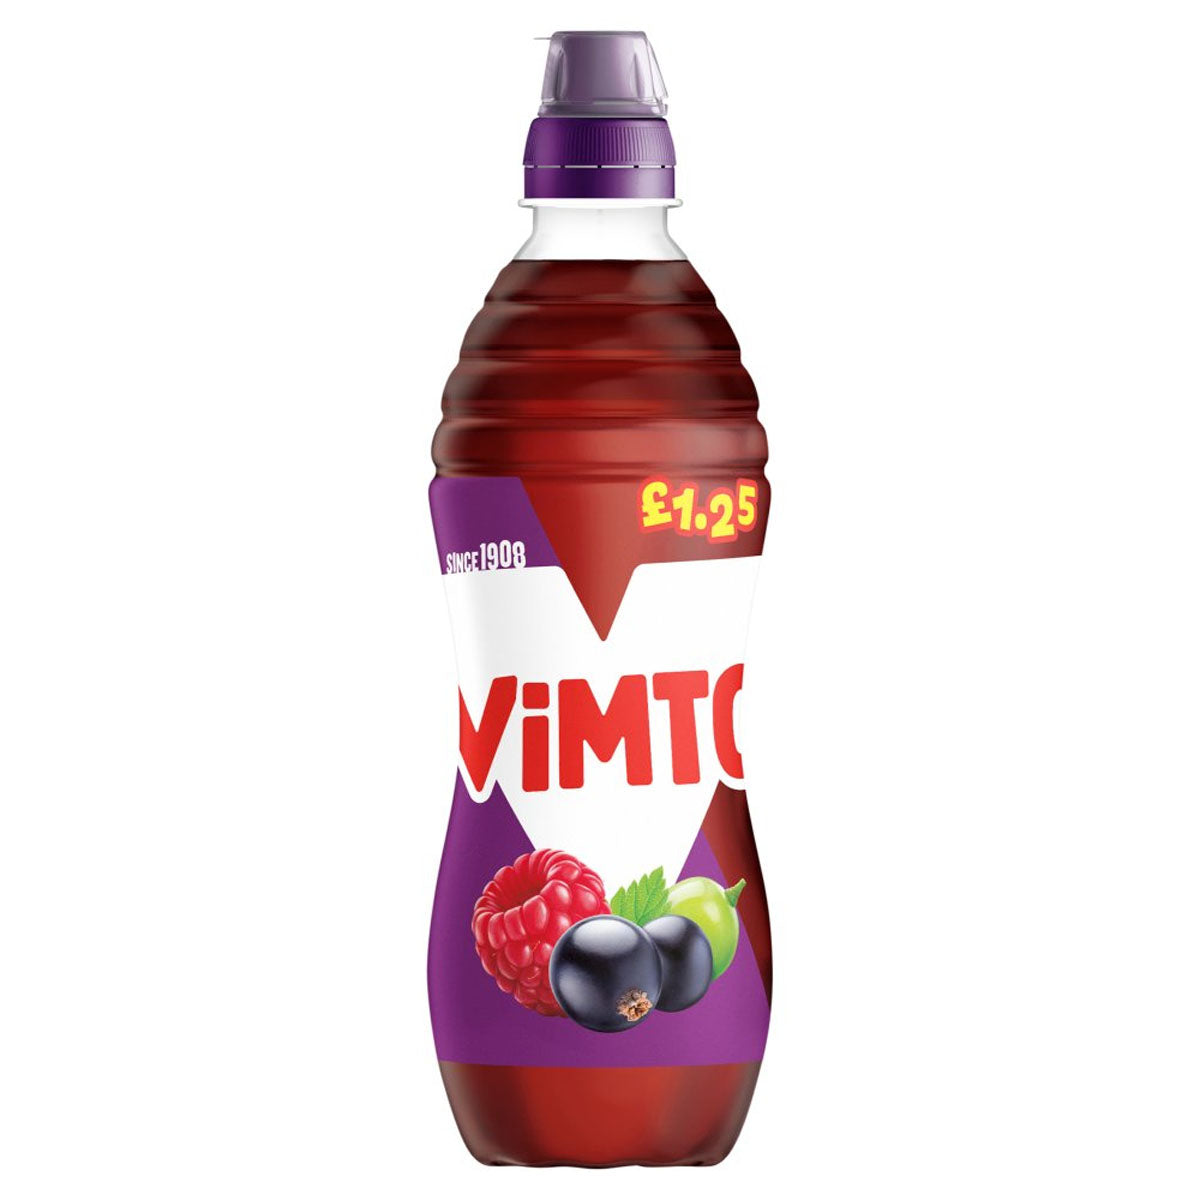 A bottle of Vimto - Original - 500ml with blackberries and raspberries on a white background.